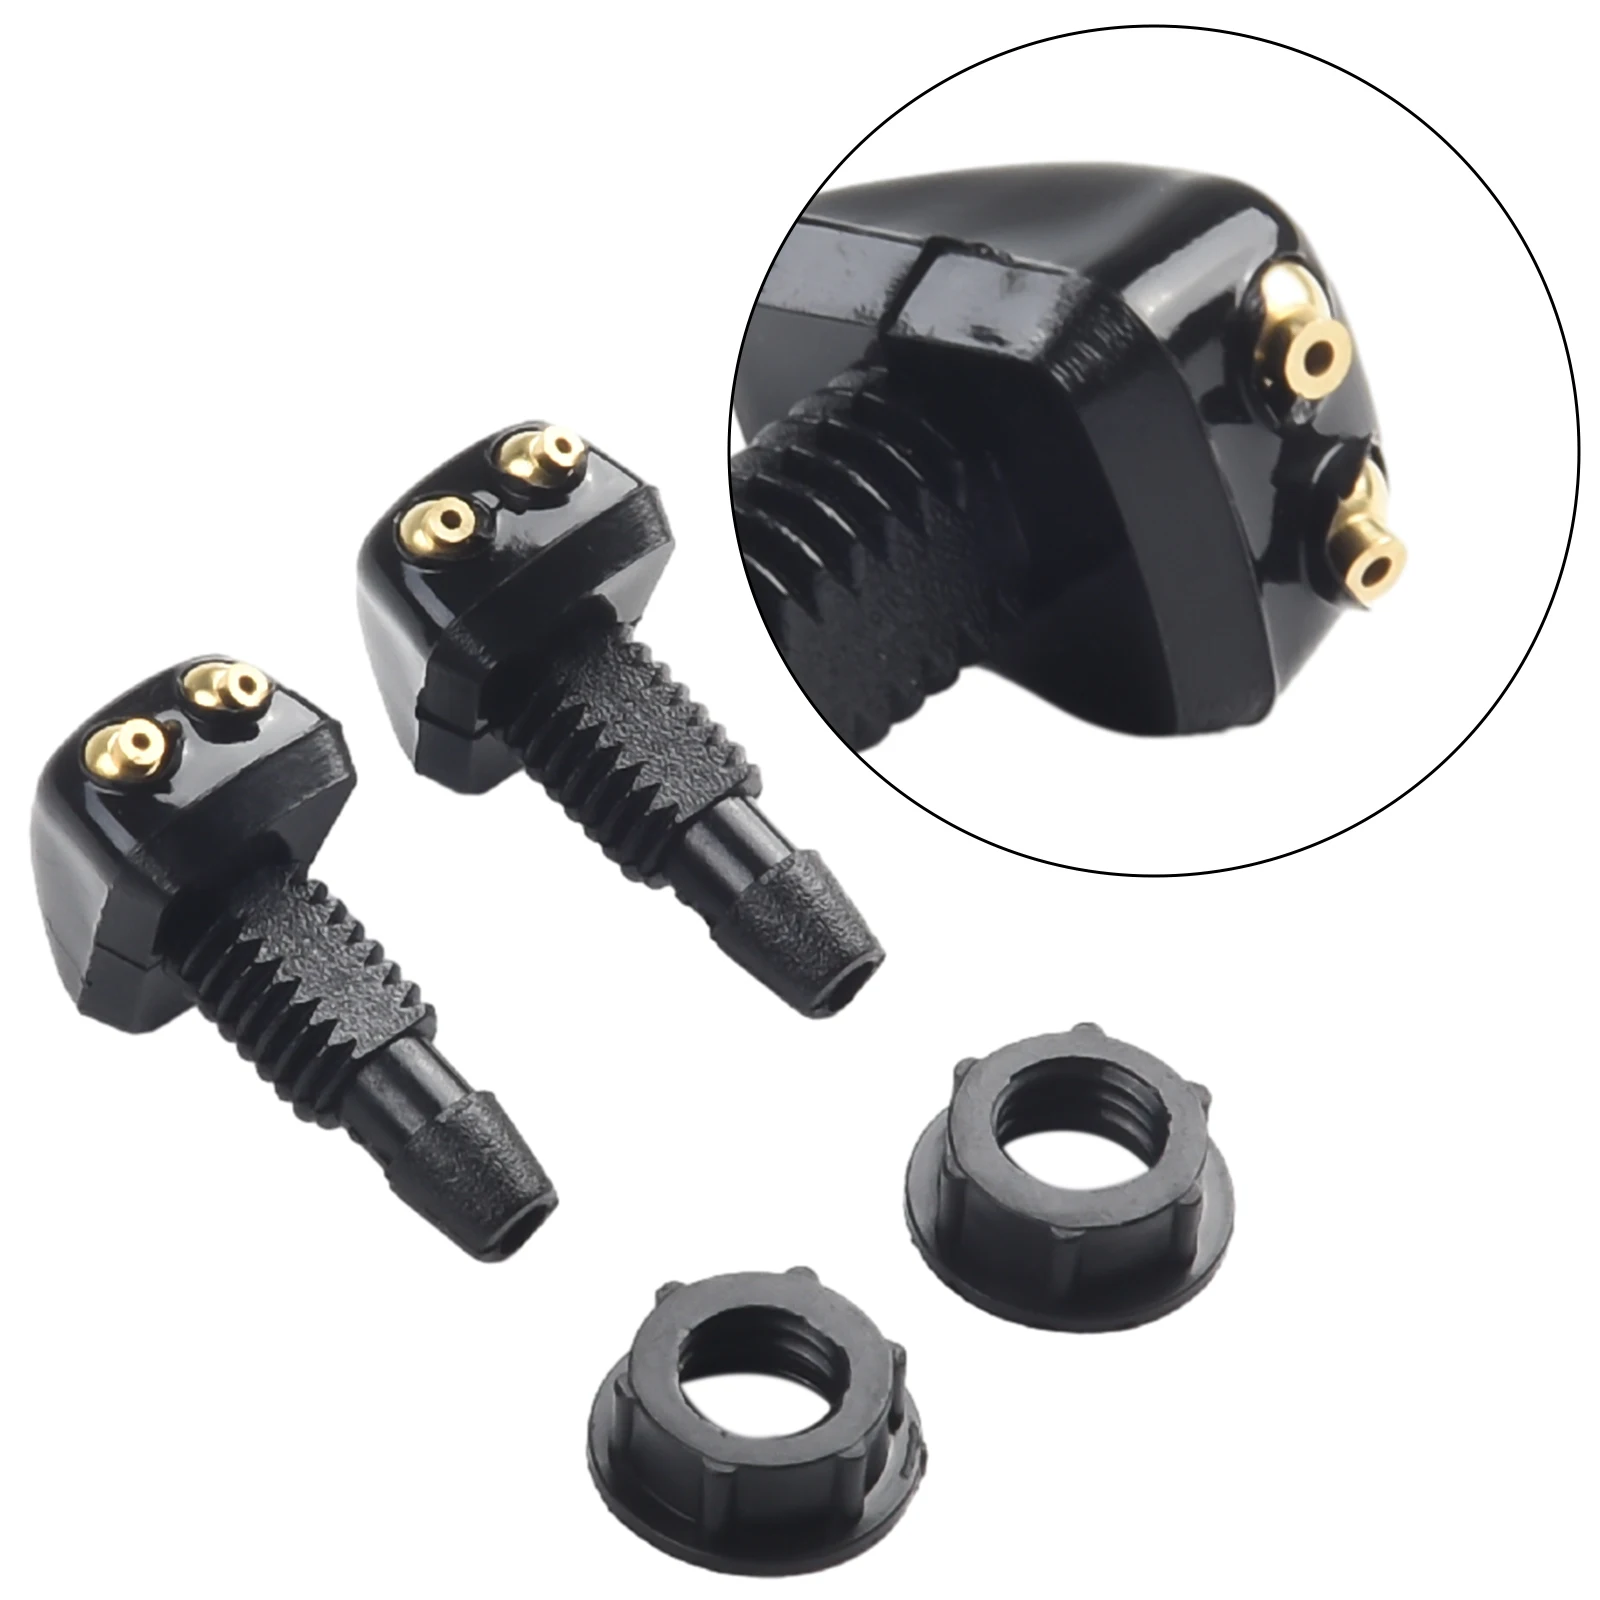 

2Pcs Car Dual-Holes Windshield Washer Nozzle Wiper Water Spray Jet Adjustable ABS Plastic Black-Wear Parts Windscreen Wipers